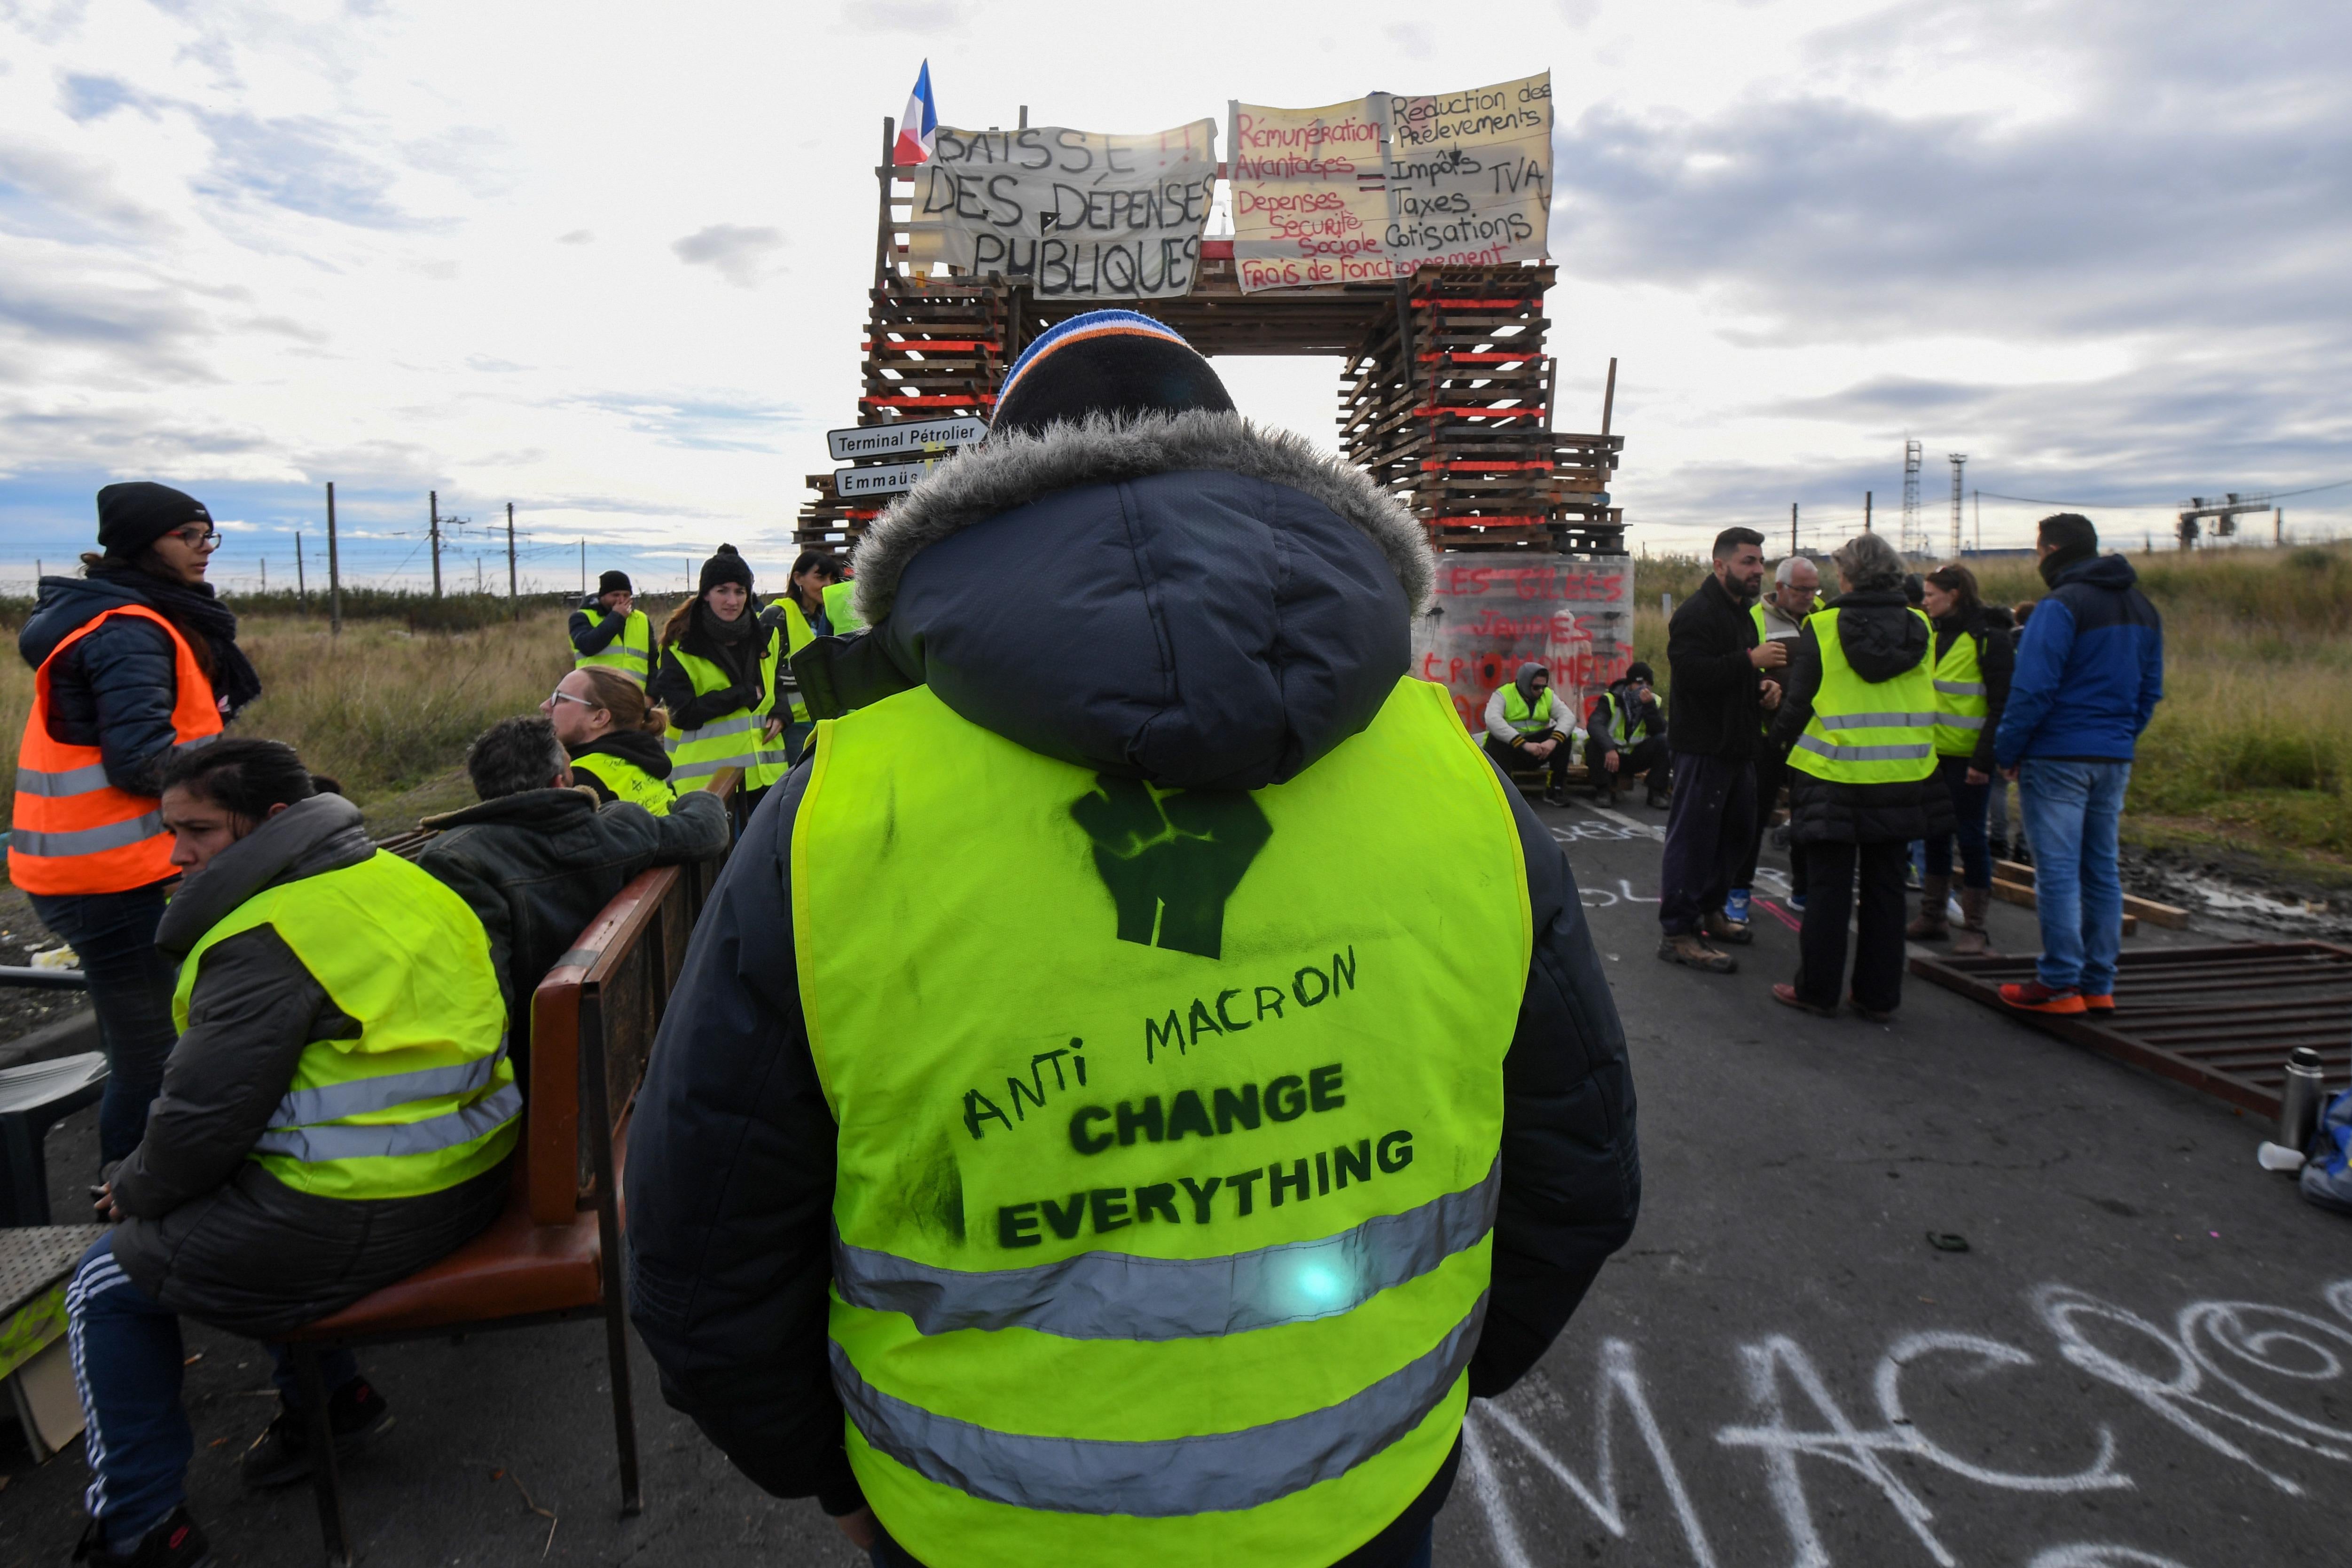 Yellow vests (Gilets jaunes) protesters block the road leading to the Frontignan oil depot in the south of France, as they demonstrate  against the rise in fuel prices and the cost of living on December 3, 2018. - Dozens of French 'yellow vest' demonstrators blocked access to a major fuel depot and several highways on the third week of anti-government protests which led to major riots in Paris at the weekend. (Photo by PASCAL GUYOT / AFP)        (Photo credit should read PASCAL GUYOT/AFP/Getty Images)